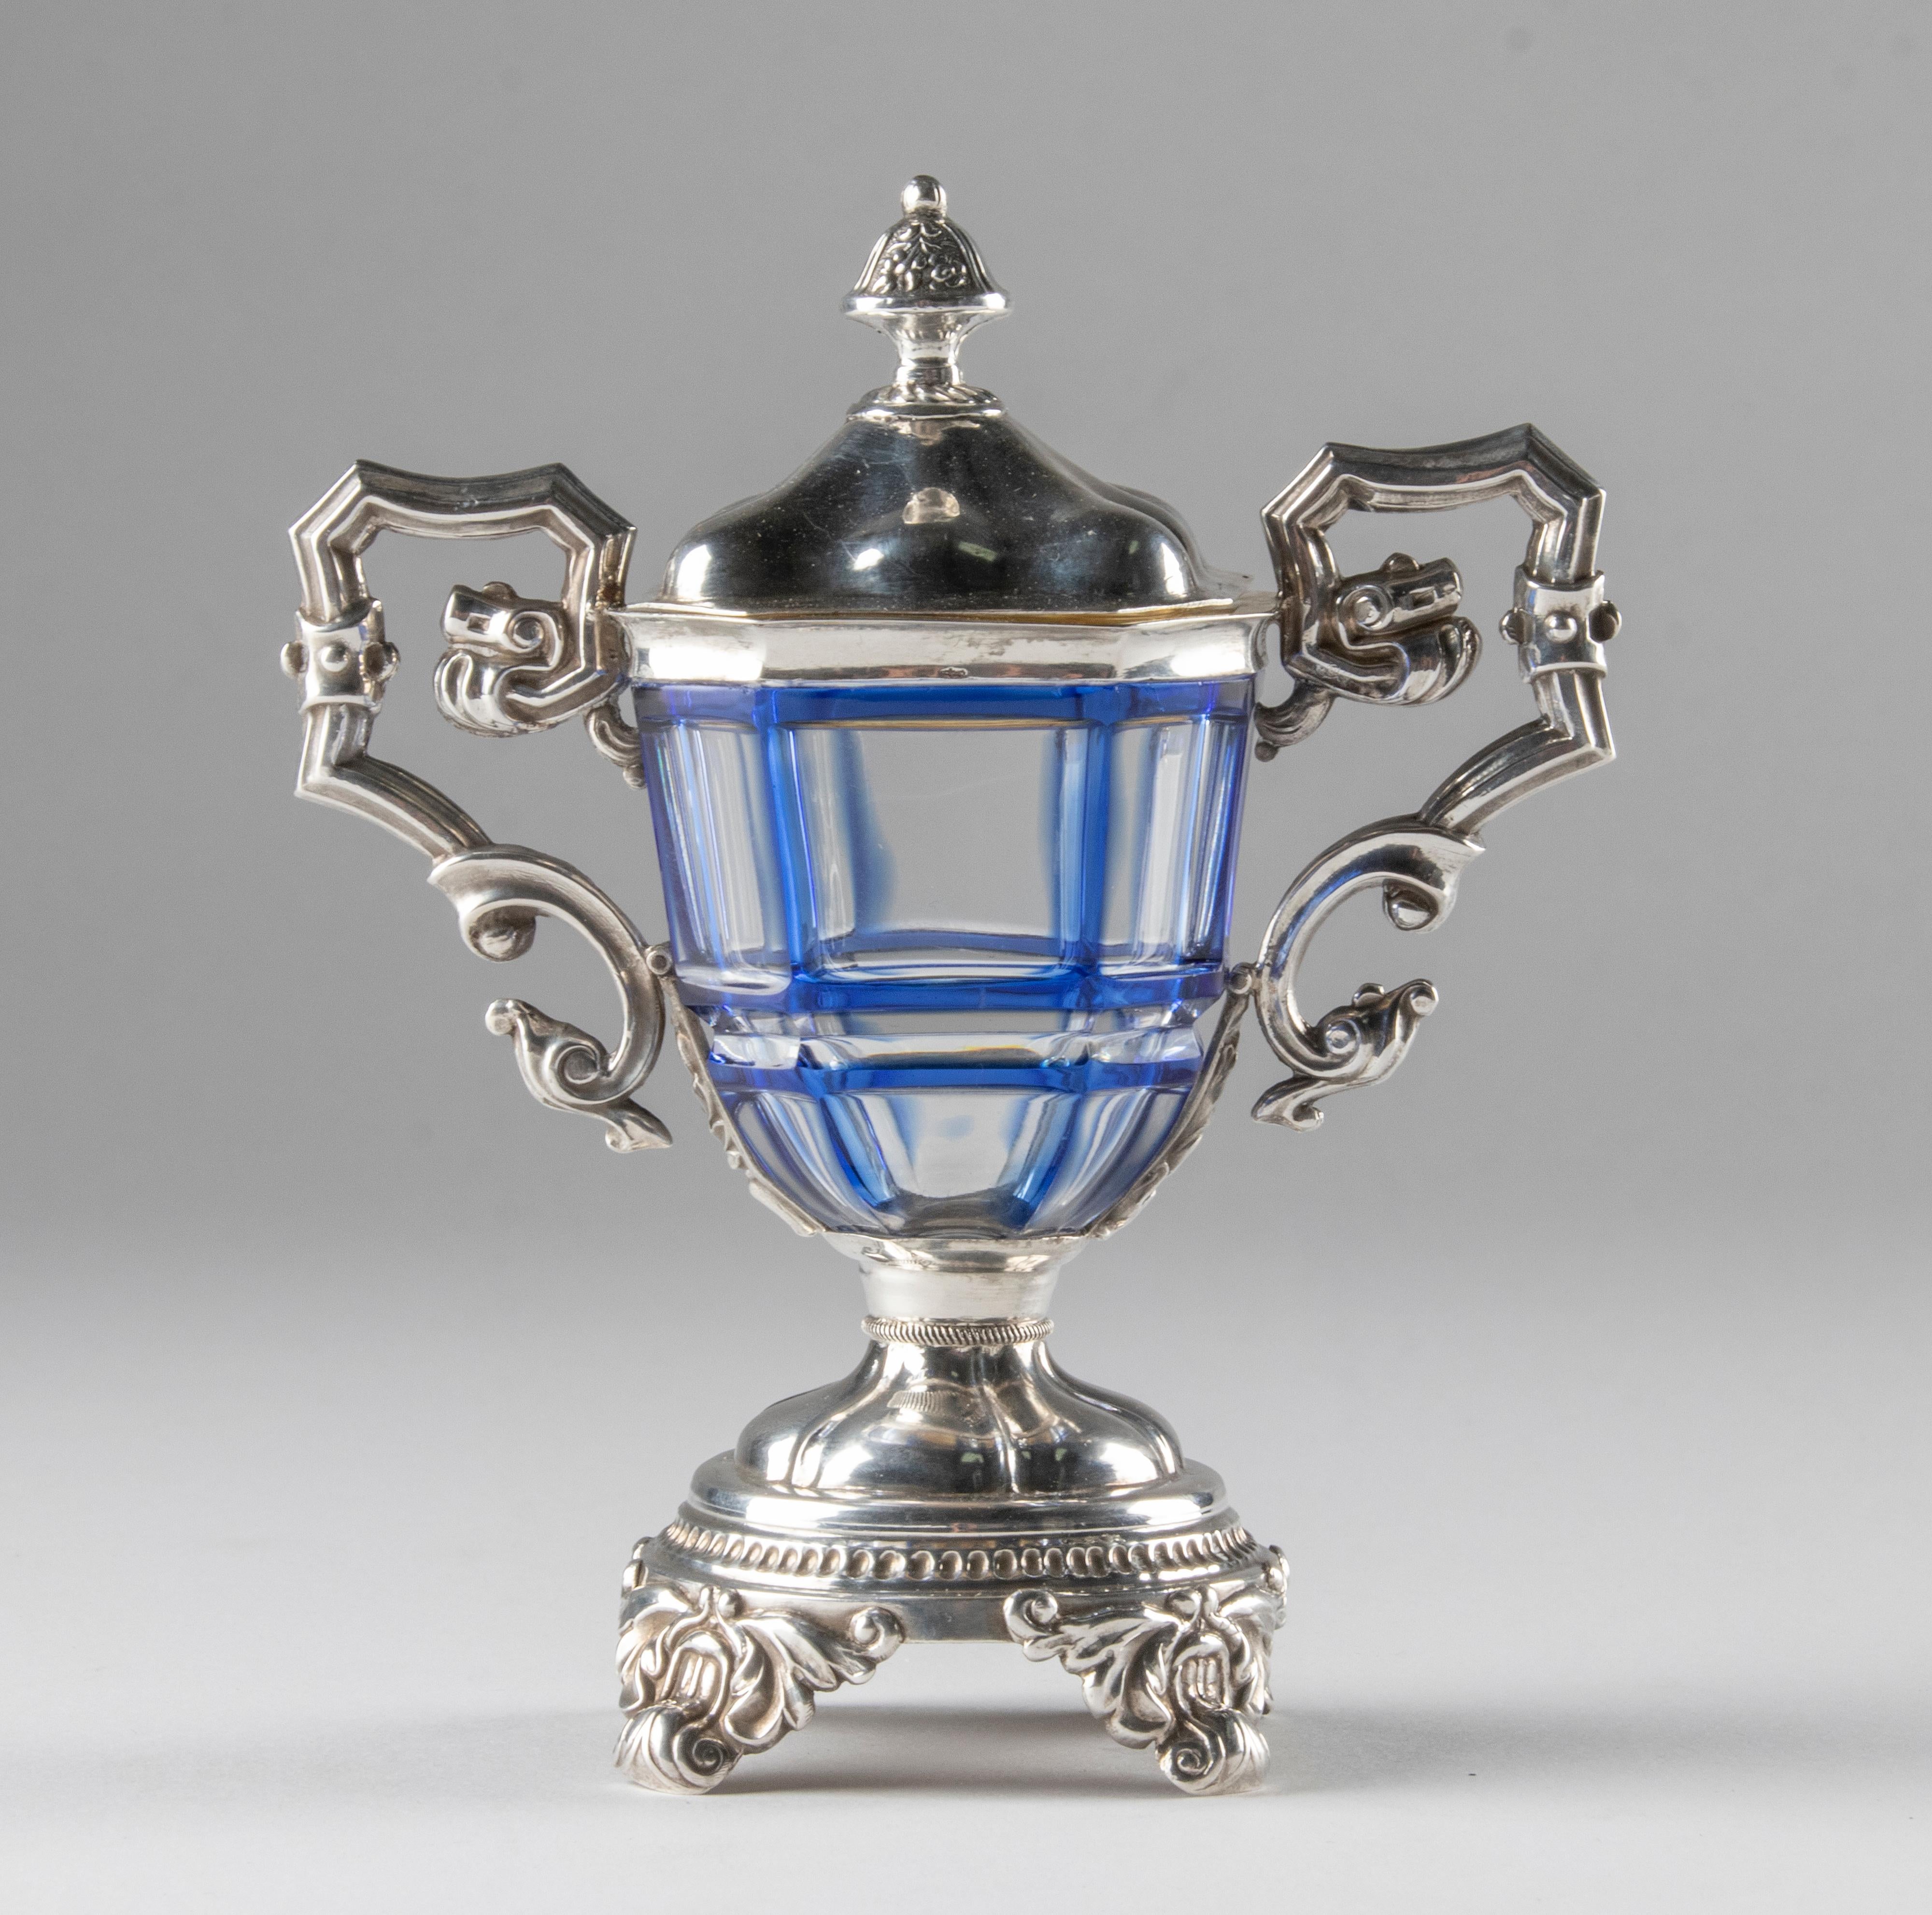 Beautiful late 19th century antique mustard pot. The jar is made of colored (blue) and clear crystal and solid silver. The inside of the lid is gold plated to prevent erosion. The silver is marked with various hall marks. These are not very legible.